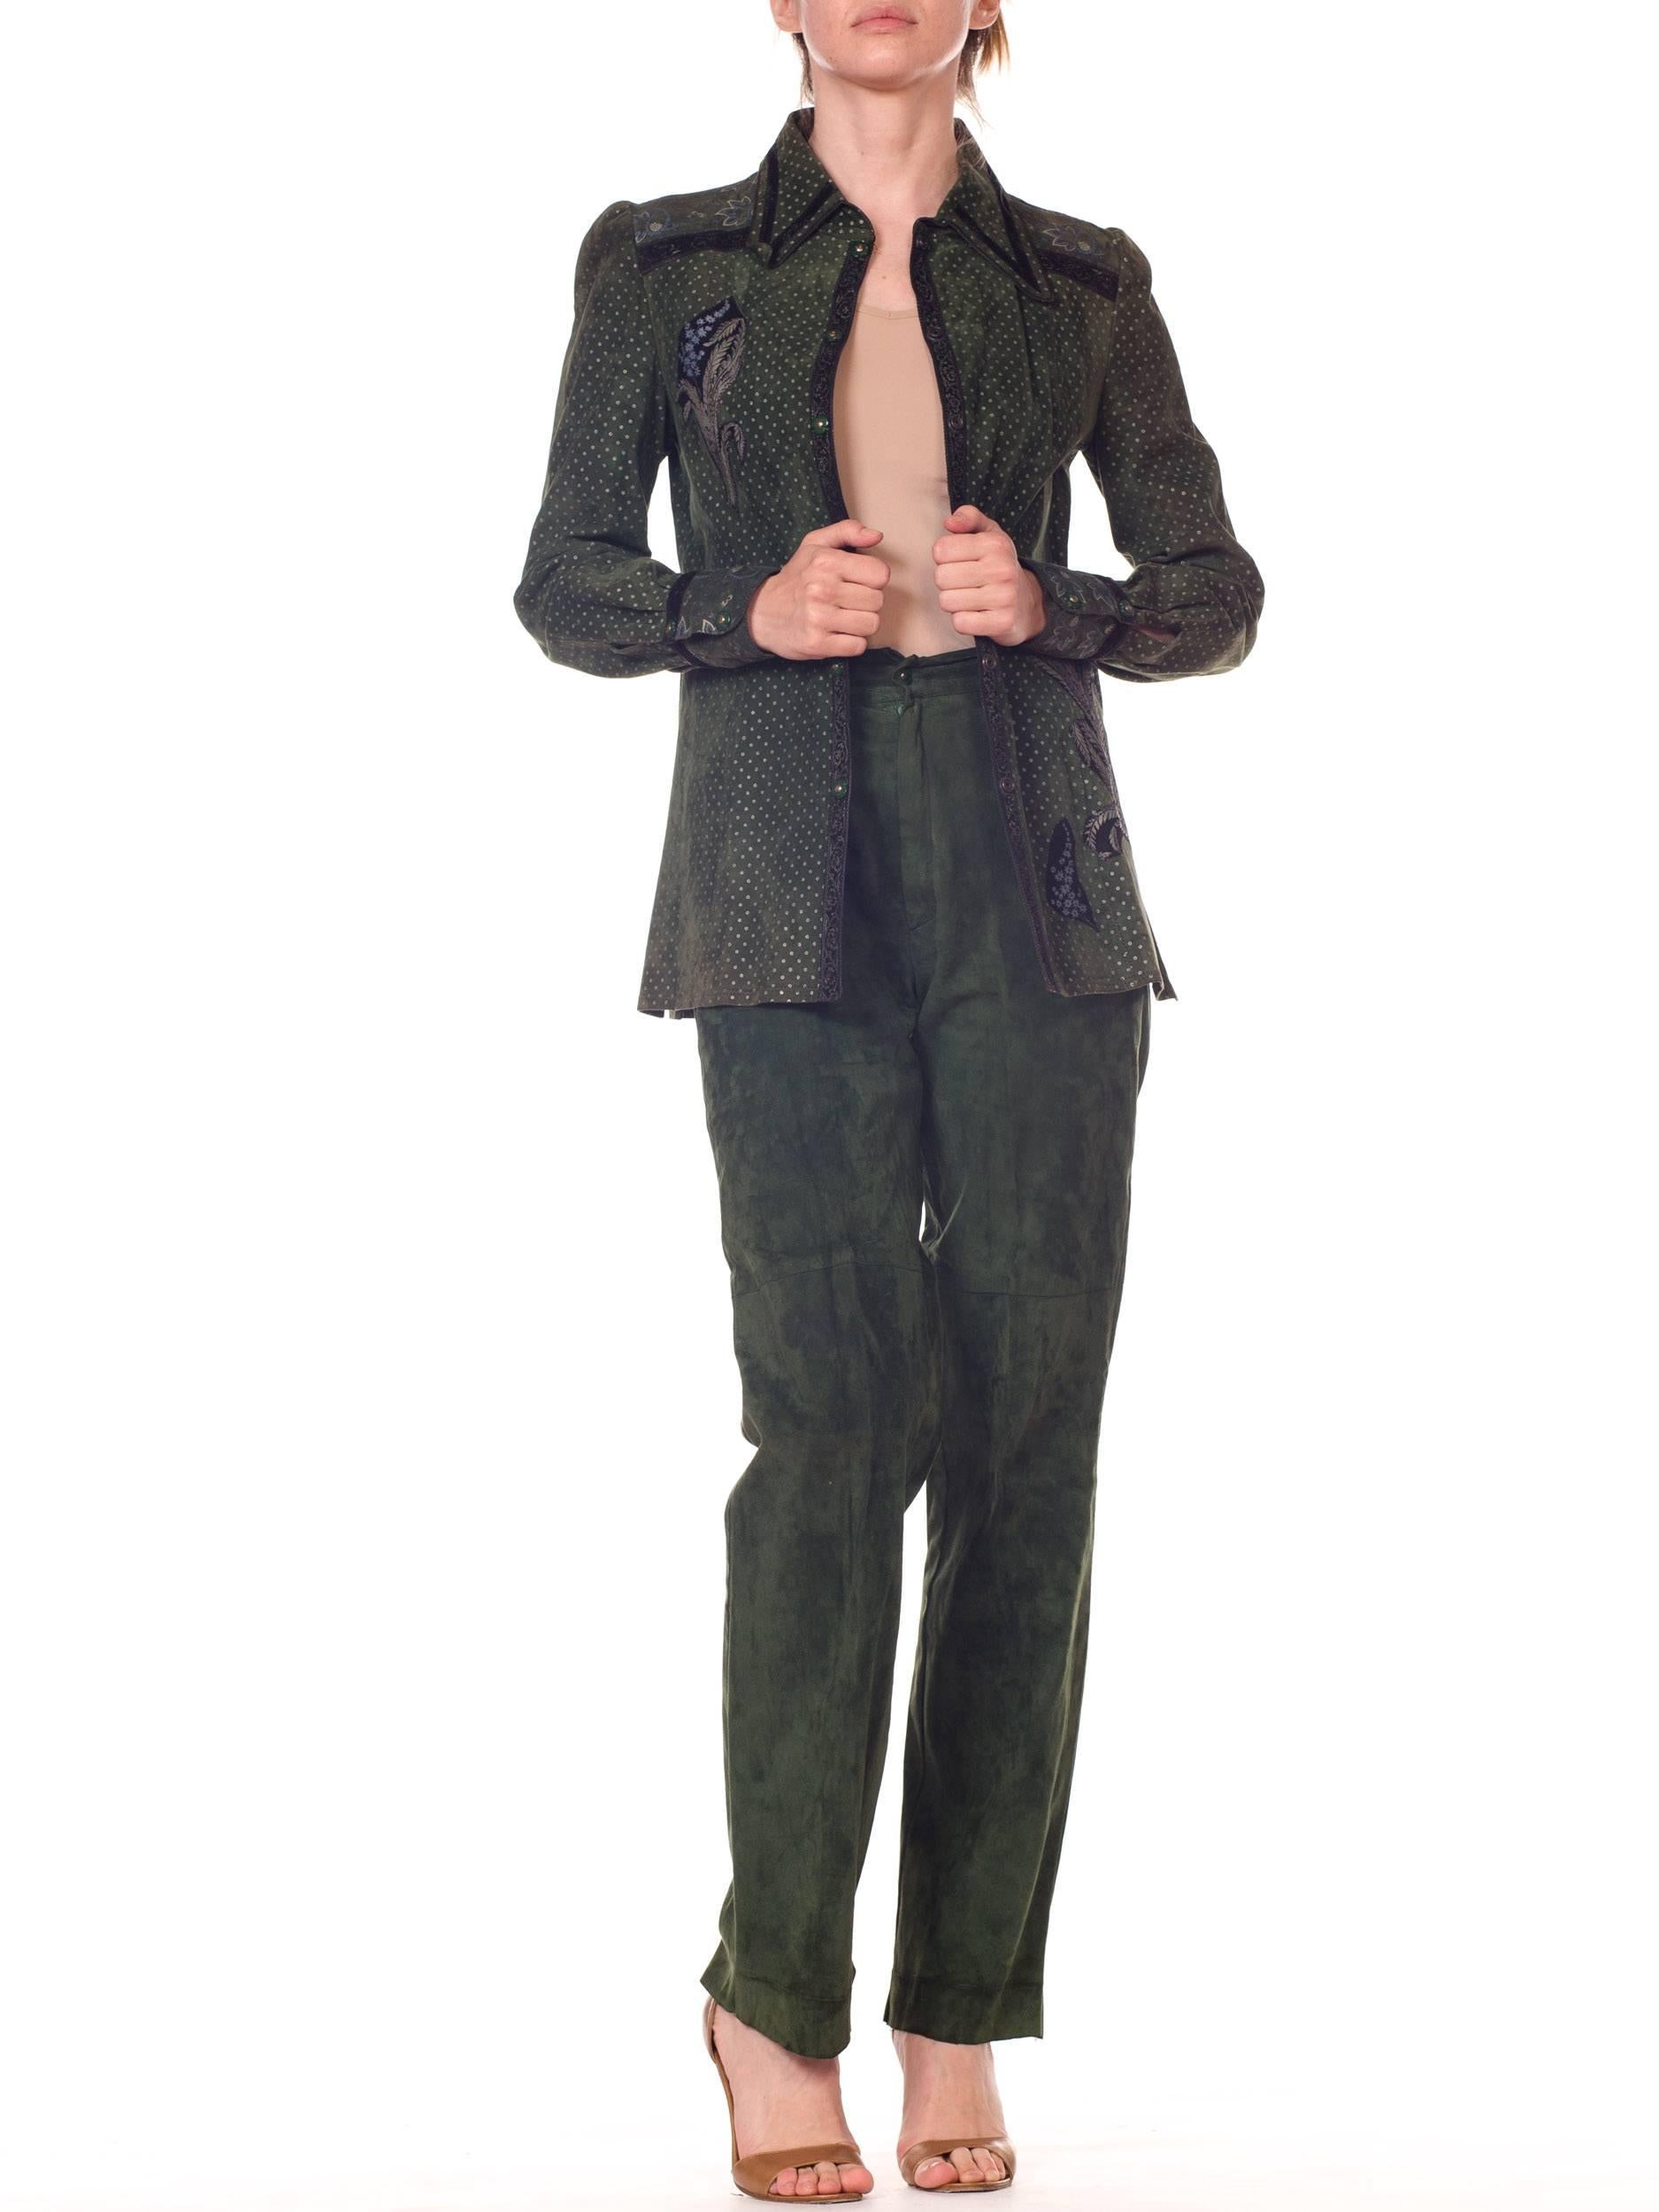 Roberto Cavalli Green Suede Pants and Jacket Set with Printed Panels  6